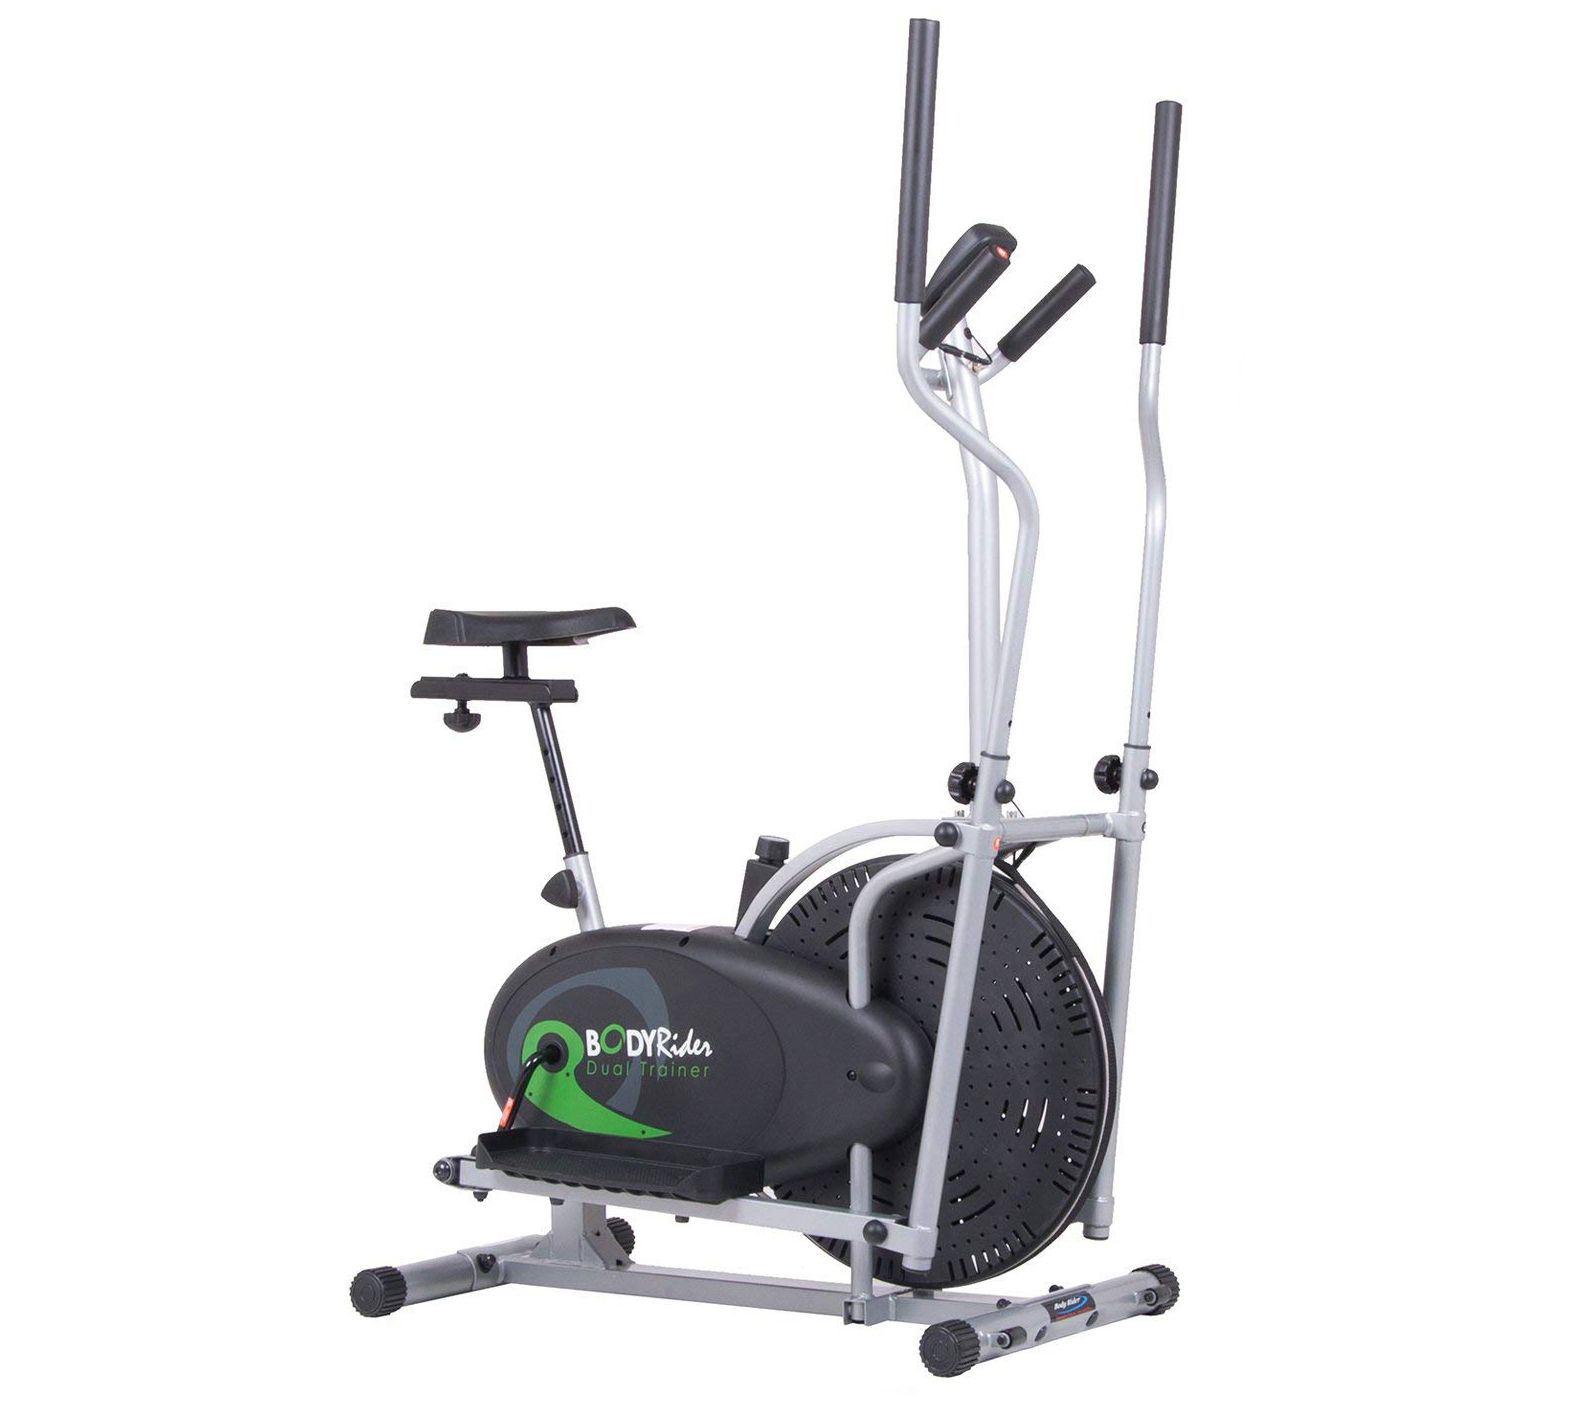 Body Rider Elliptical Trainer And Exercise Bike